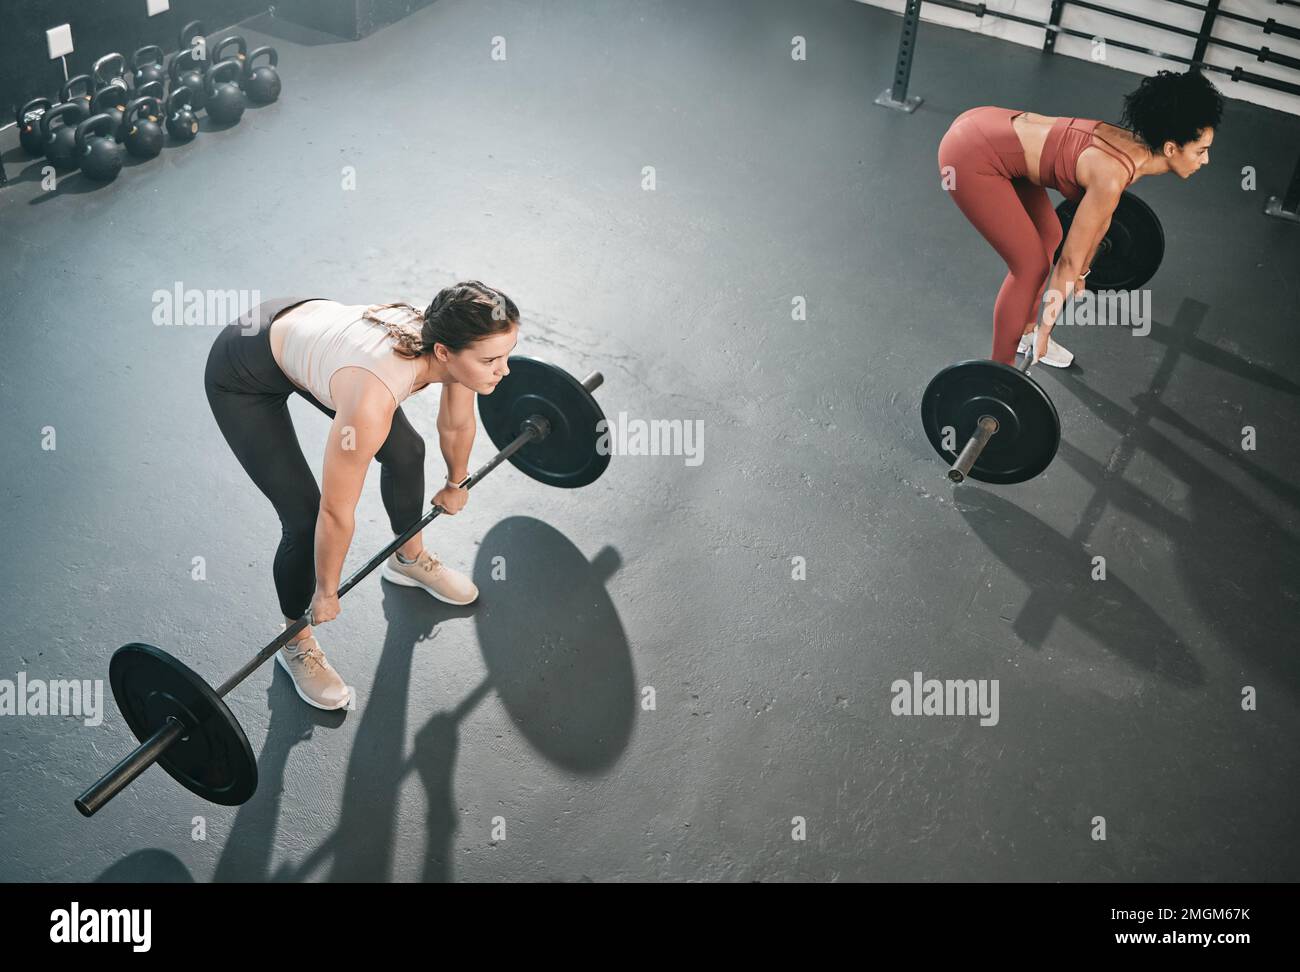 Gym class, barbell workout and women doing muscle exercise, fitness or bodybuilding power training. Strong girl, health lifestyle or top view of Stock Photo